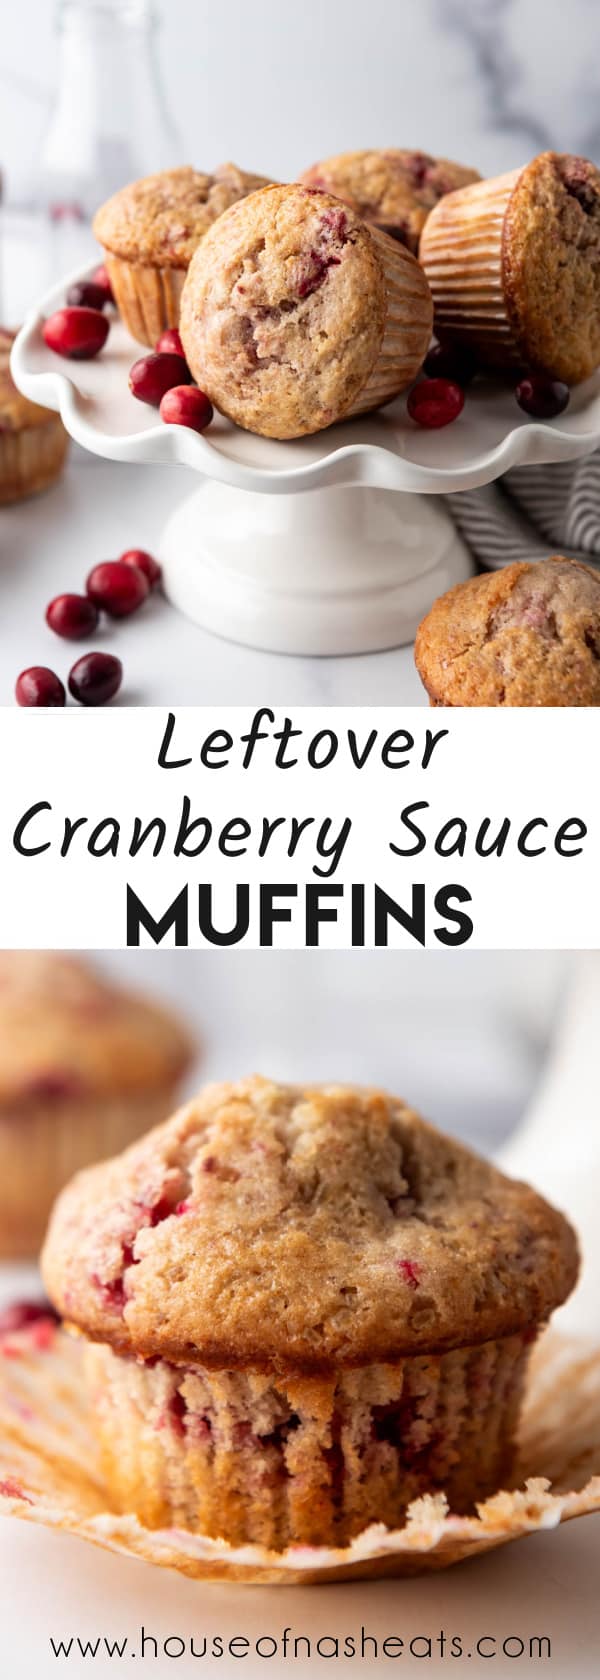 A collage of images of cranberry sauce muffins with text overlay.